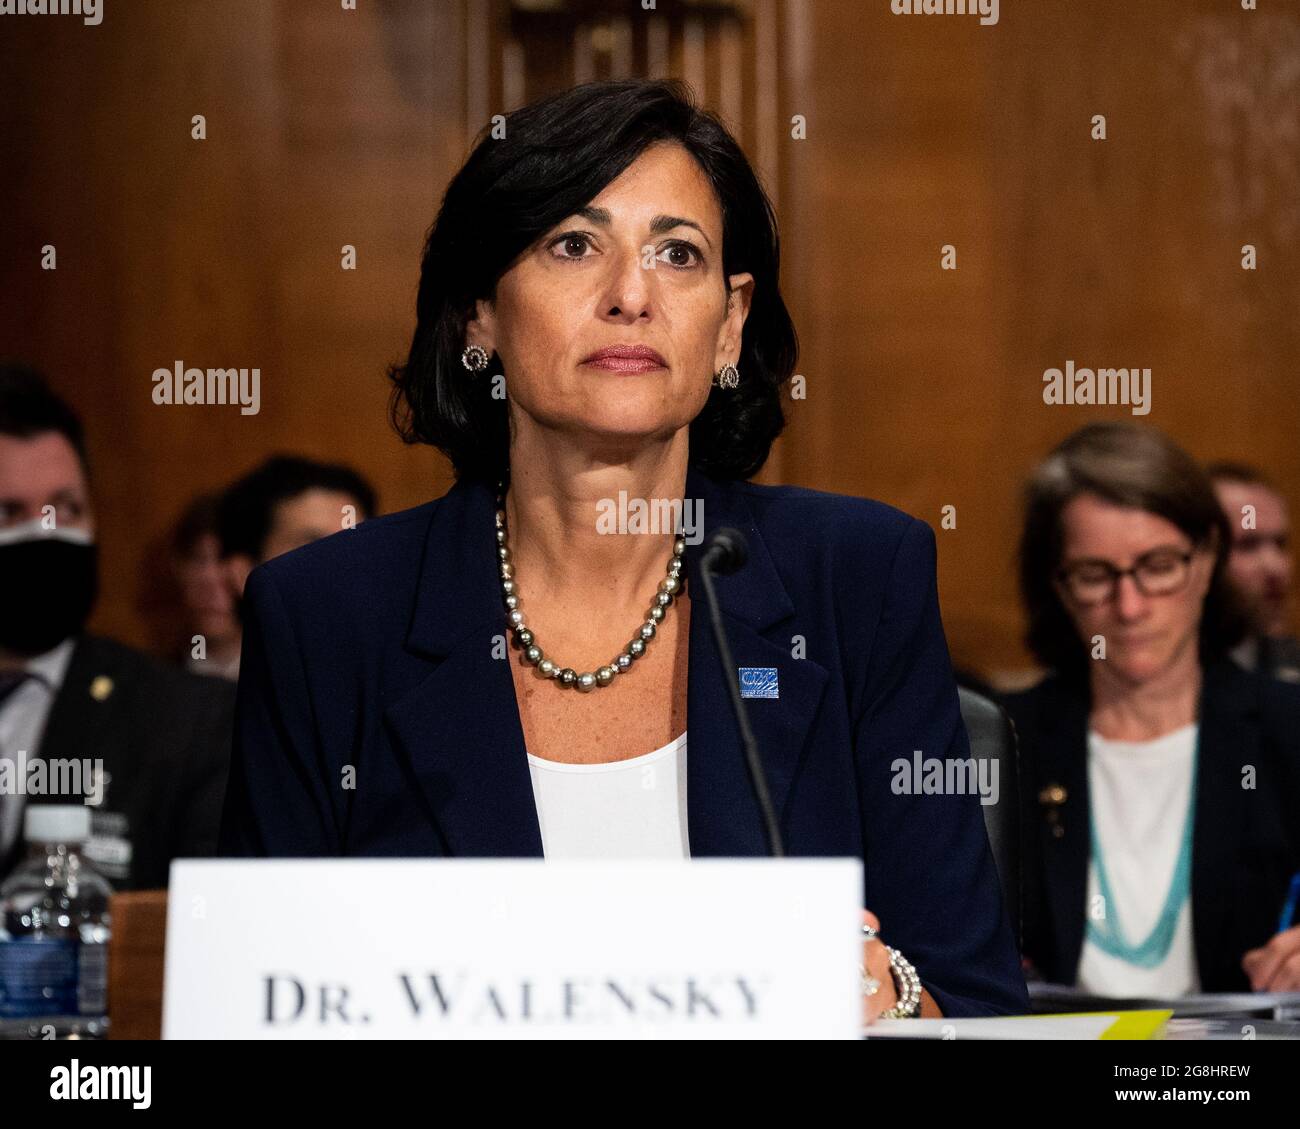 Washington, United States. 20th July, 2021. Dr. Rochelle Walensky, Director of the Centers for Disease Control and Prevention attends a hearing of the Senate Health, Education, Labor, and Pensions Committee. Credit: SOPA Images Limited/Alamy Live News Stock Photo